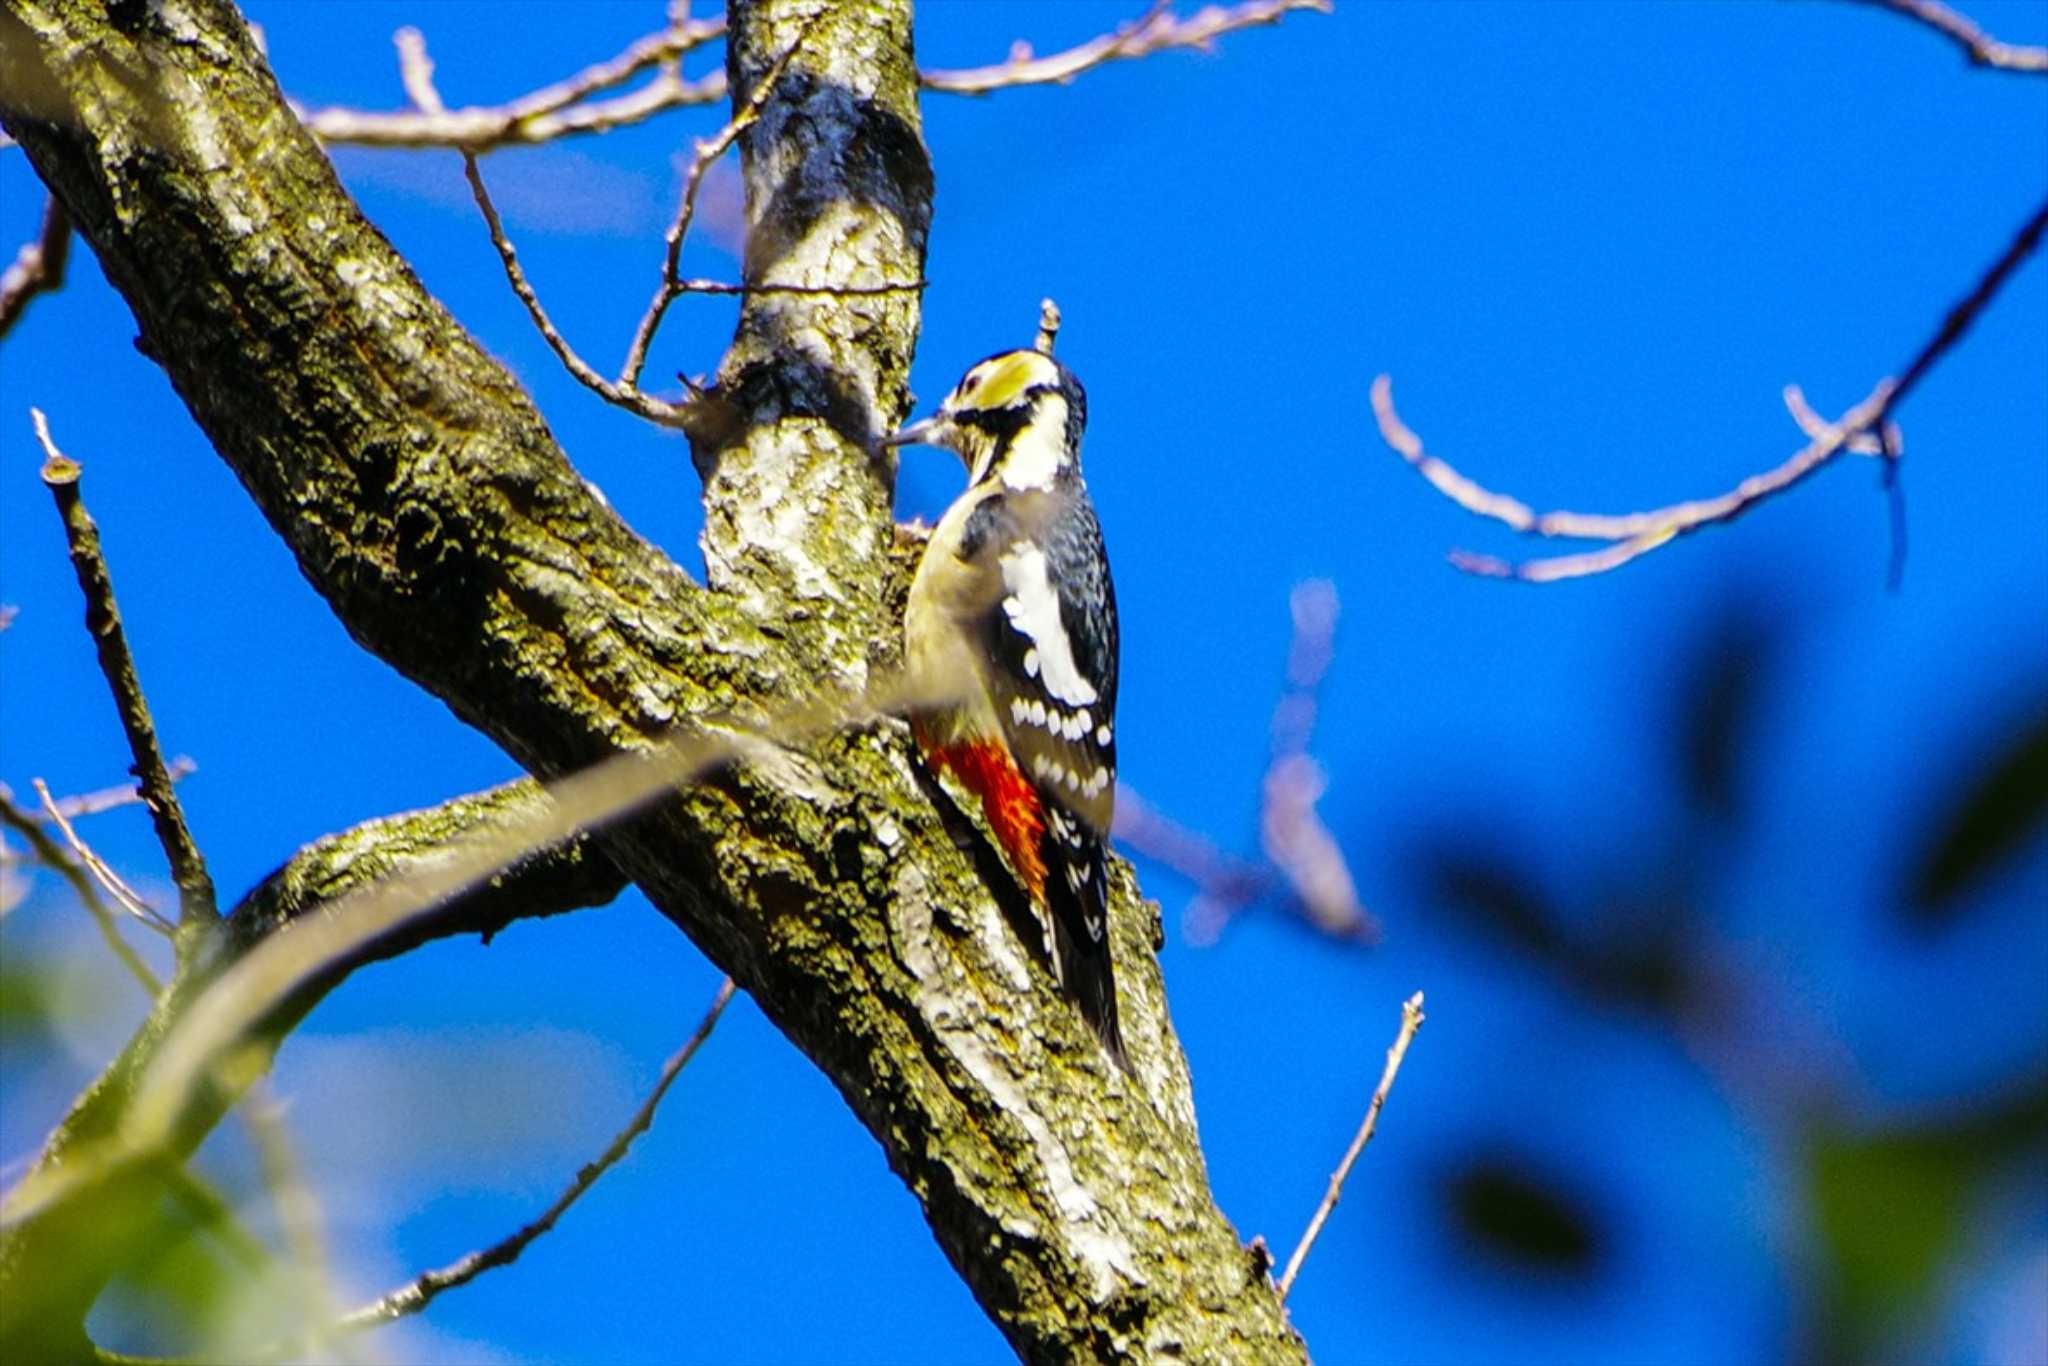 Photo of Great Spotted Woodpecker at 厚木七沢森林公園 by BW11558